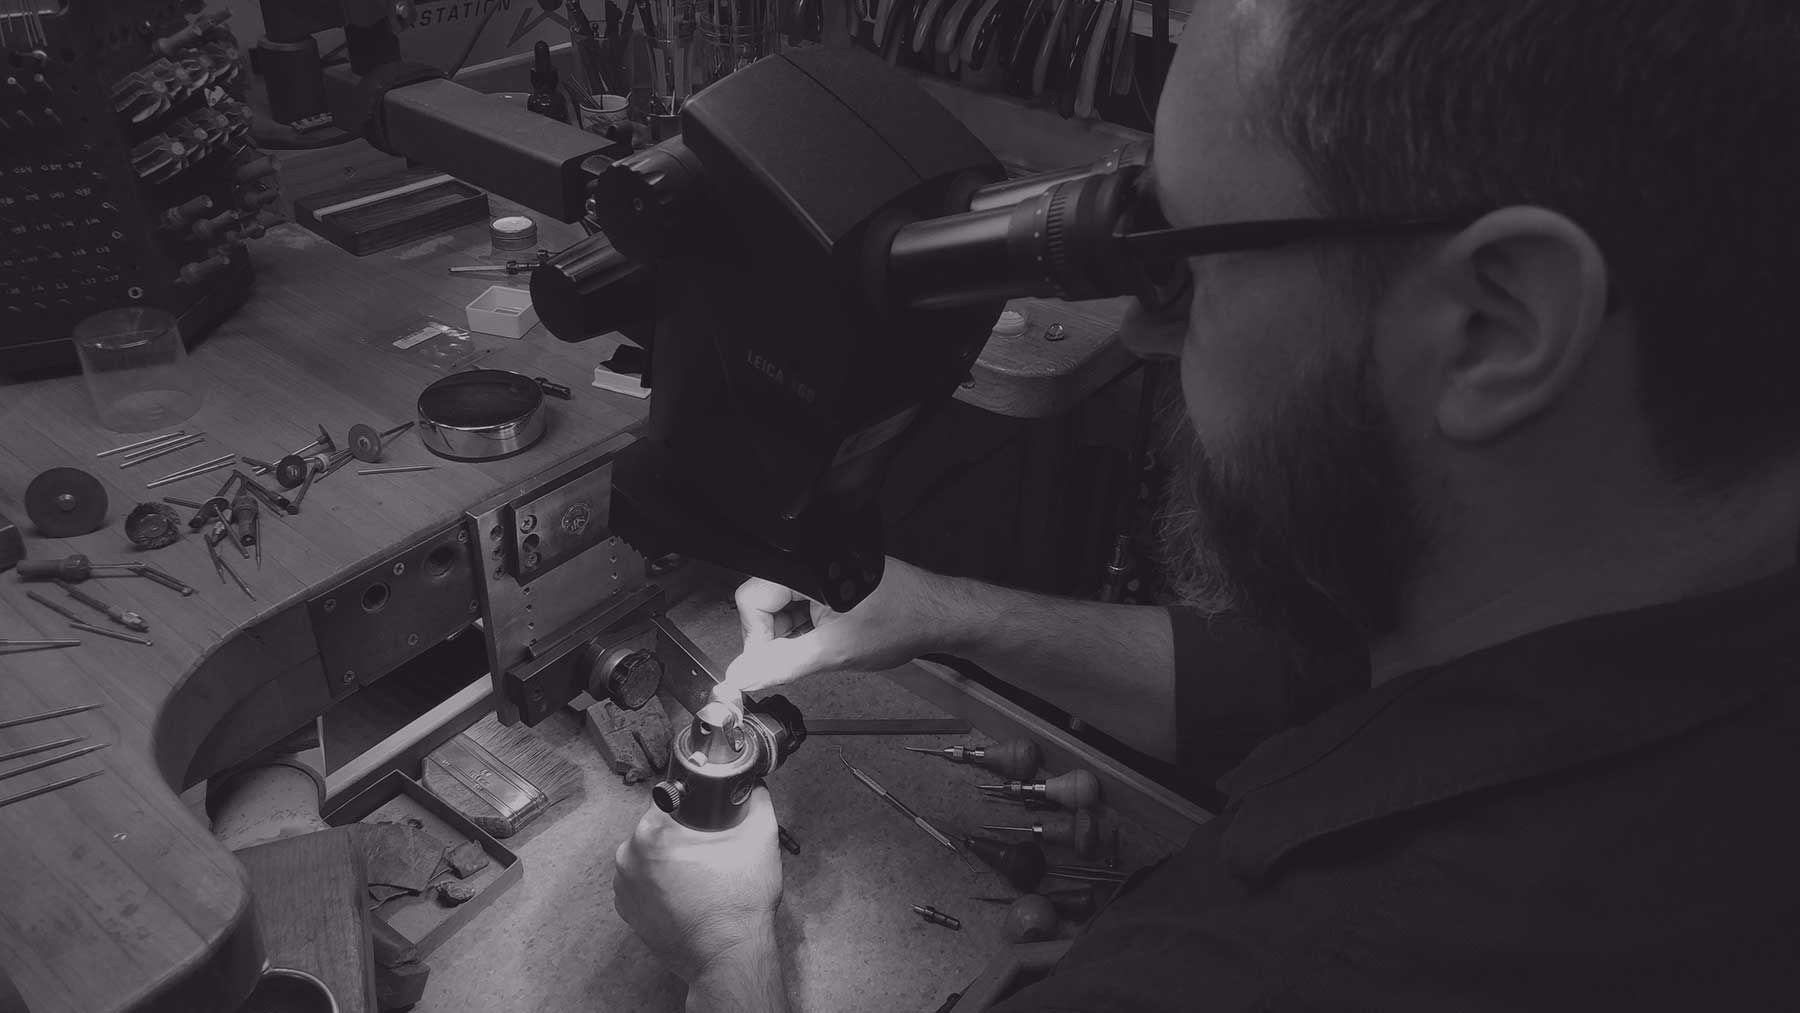 patrick working at the jewelers bench